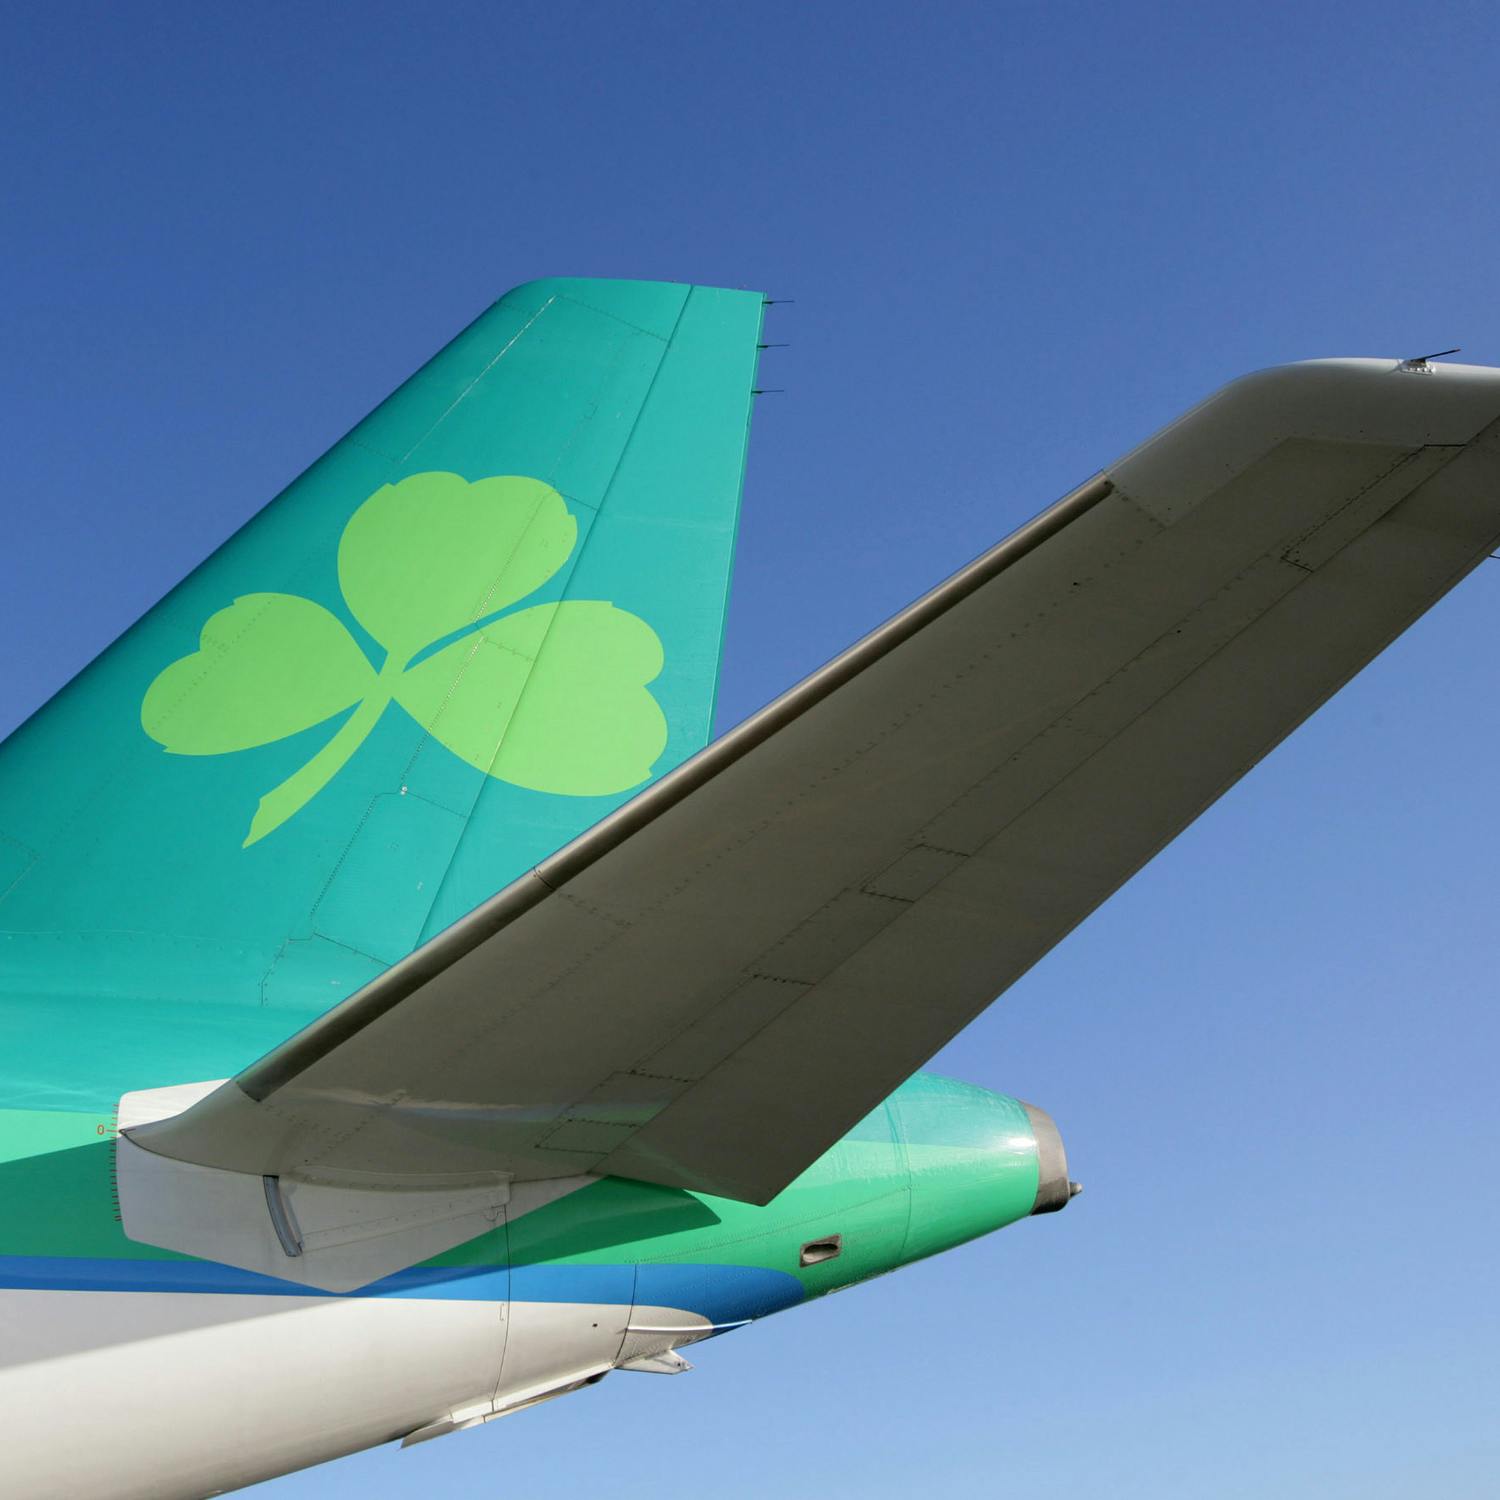 The Labour Court are set to intervene in the dispute between Aer Lingus and IALPA